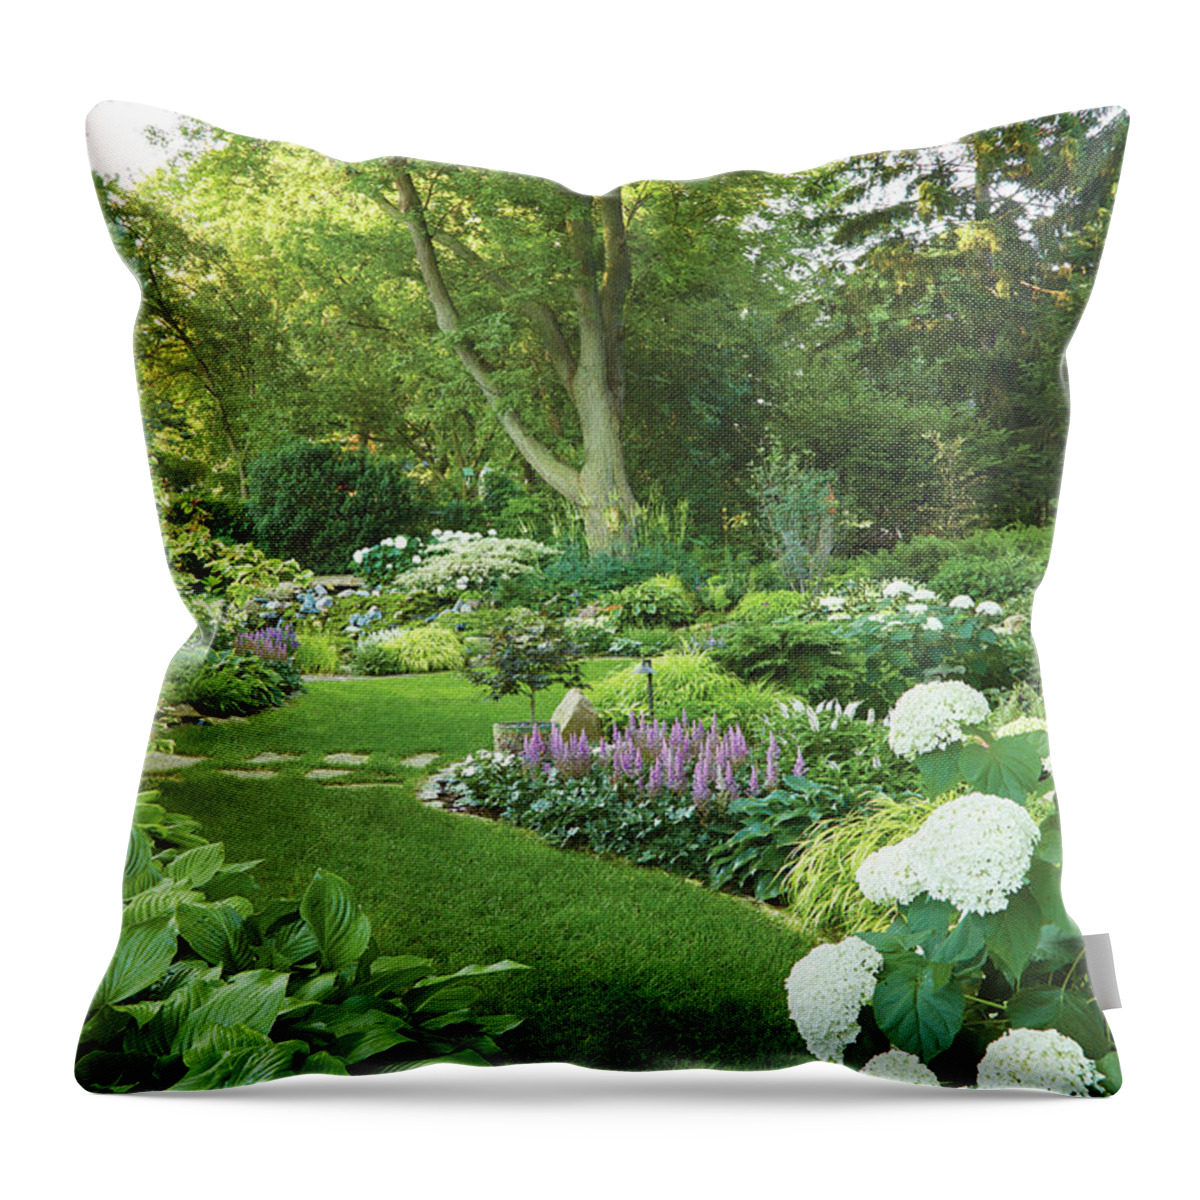 Flowers Throw Pillow featuring the photograph Backyard perfection by Garden Gate magazine